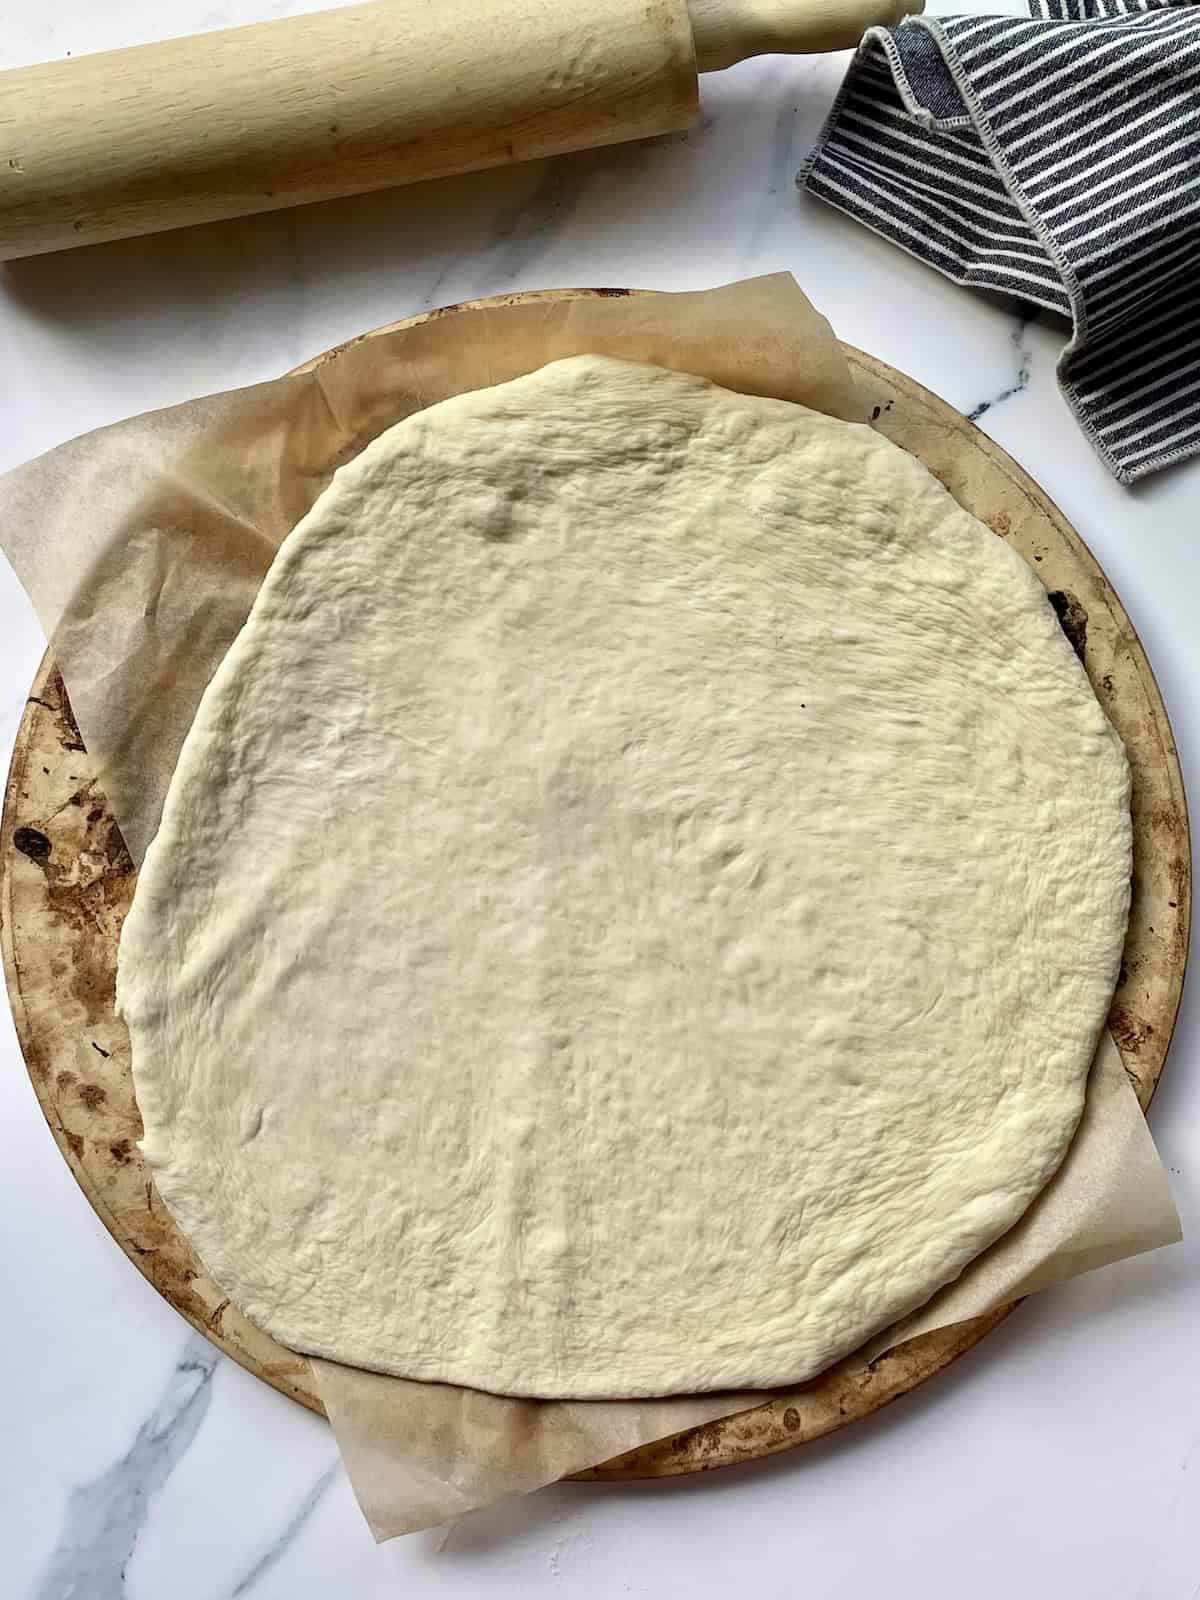 homemade pizza dough spread on a parchment paper and pizza stone